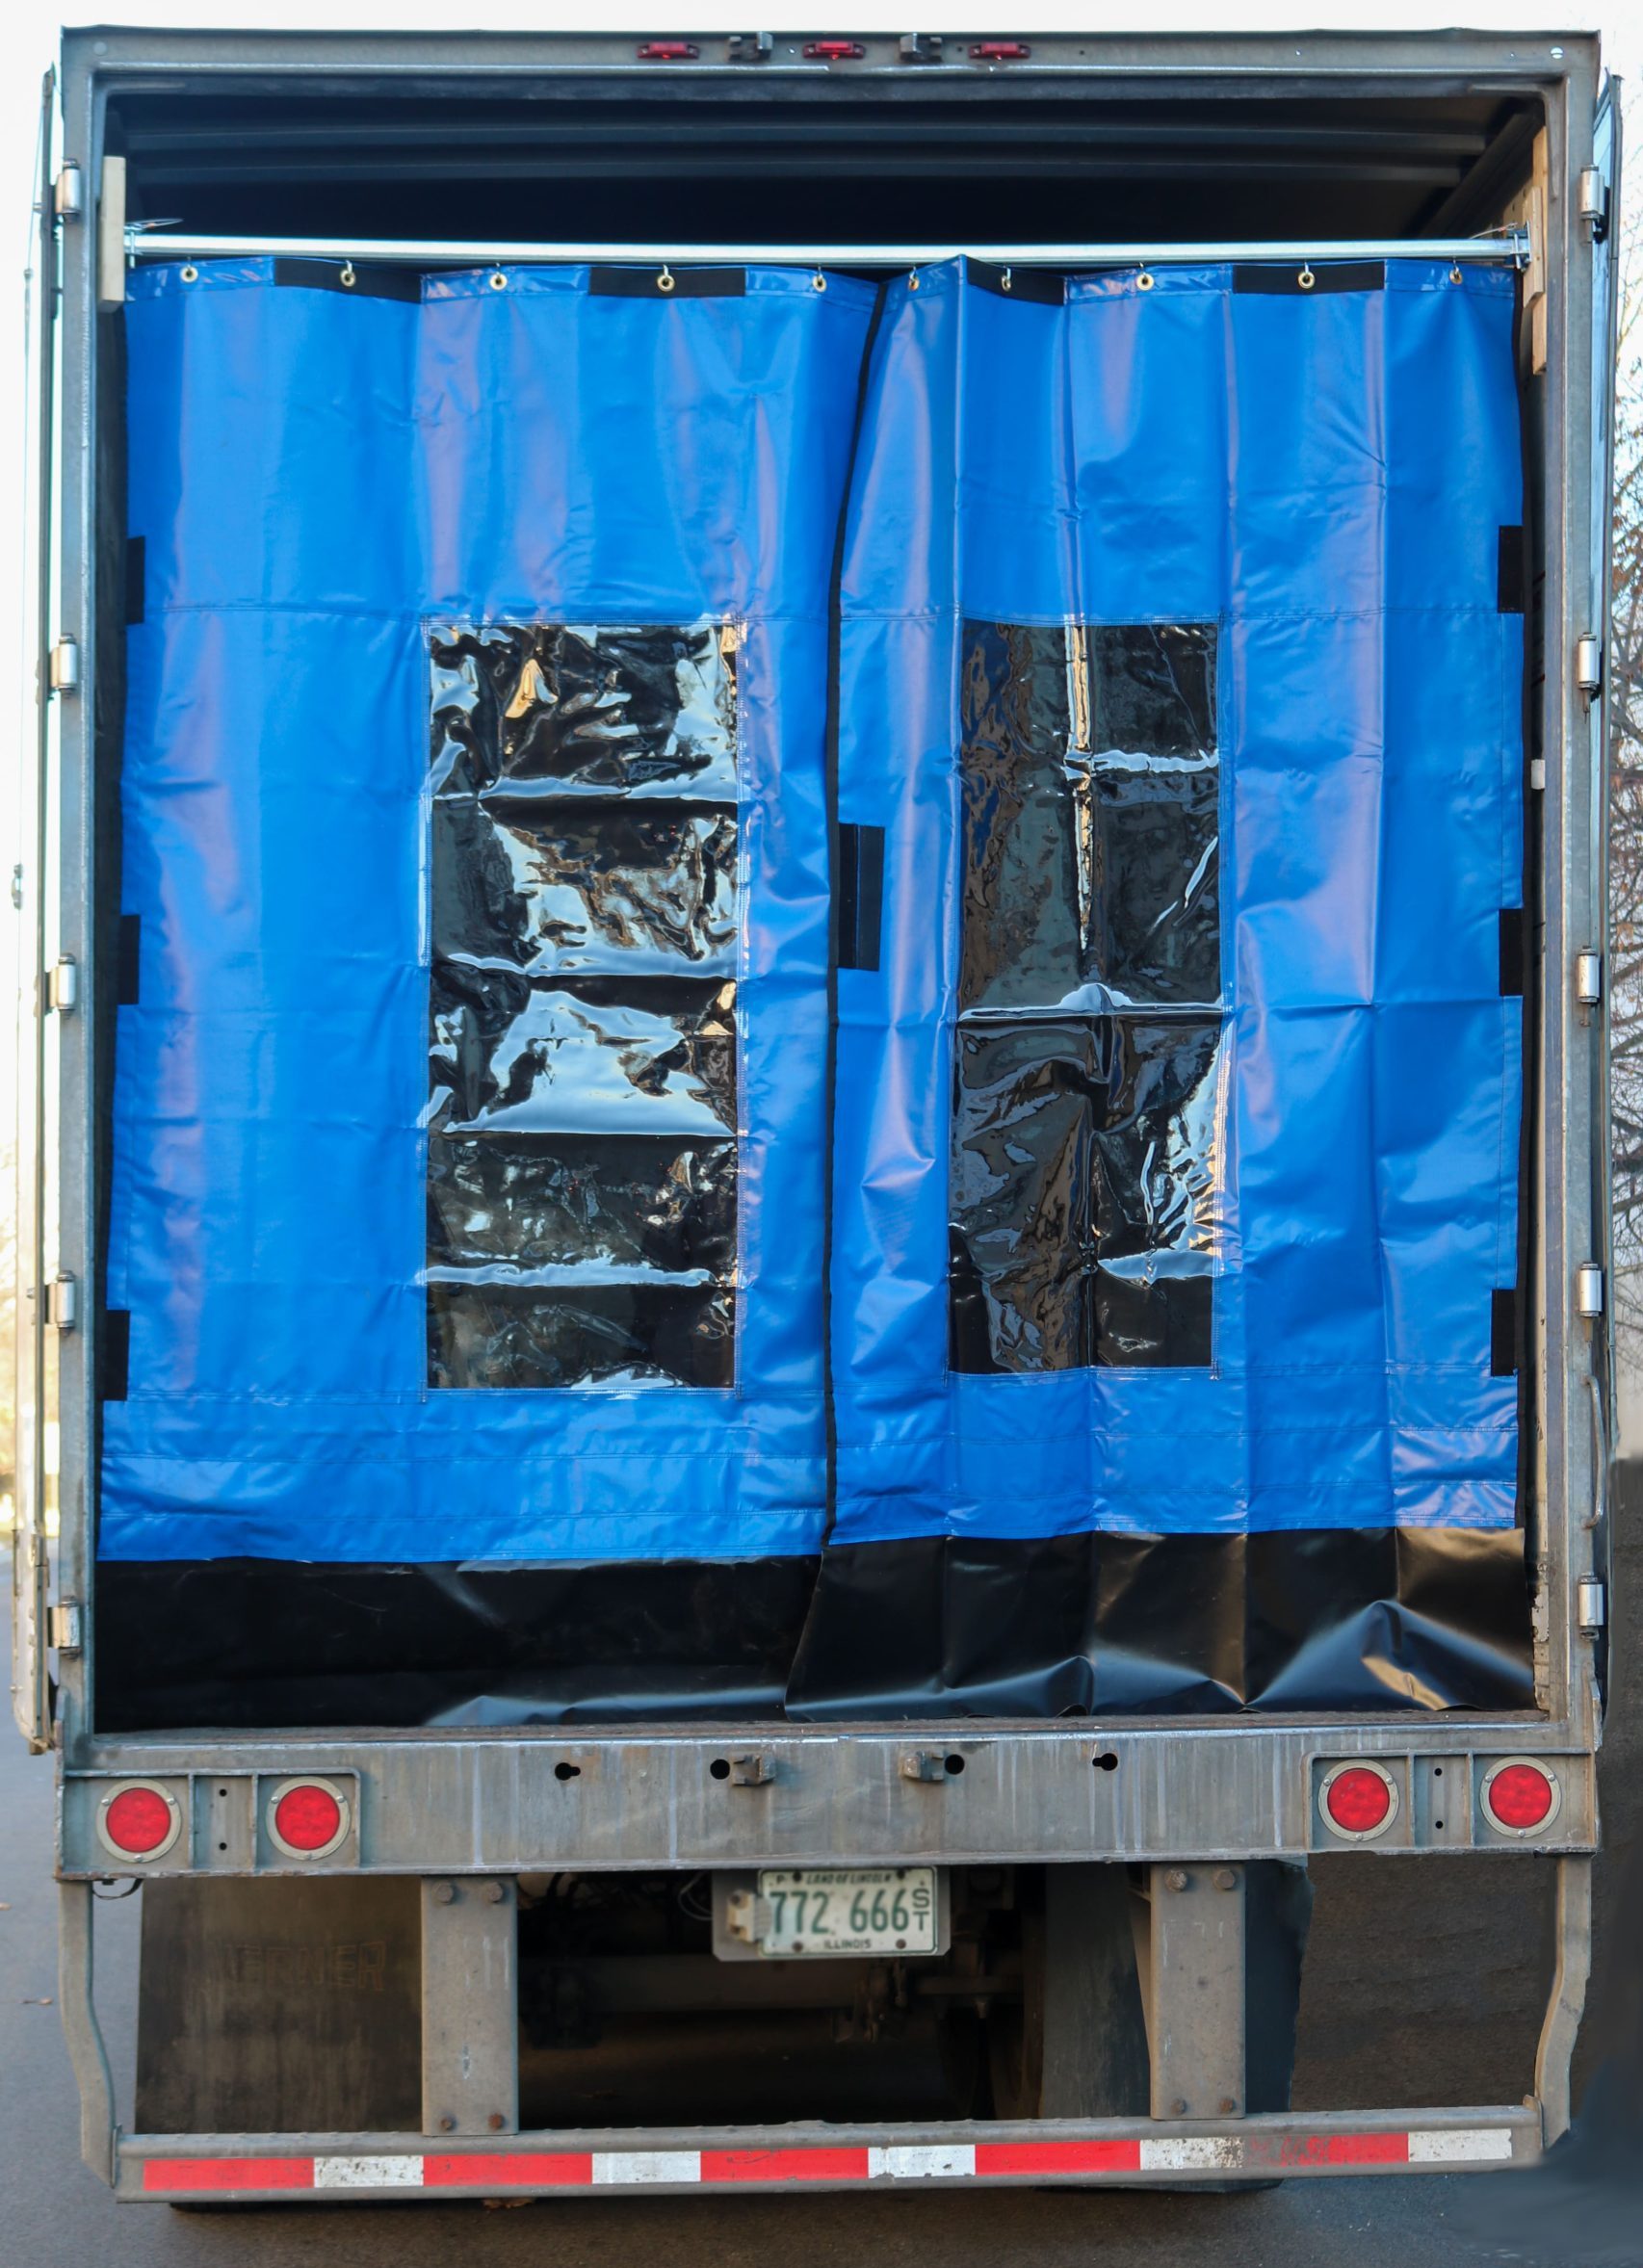 Refrigerated truck being efficiently loaded/unloaded with Schaumburg Specialties’ premium Refrigerated Truck Curtains in use, helping to ensure optimal temperature control for perishable goods inside the trailer.